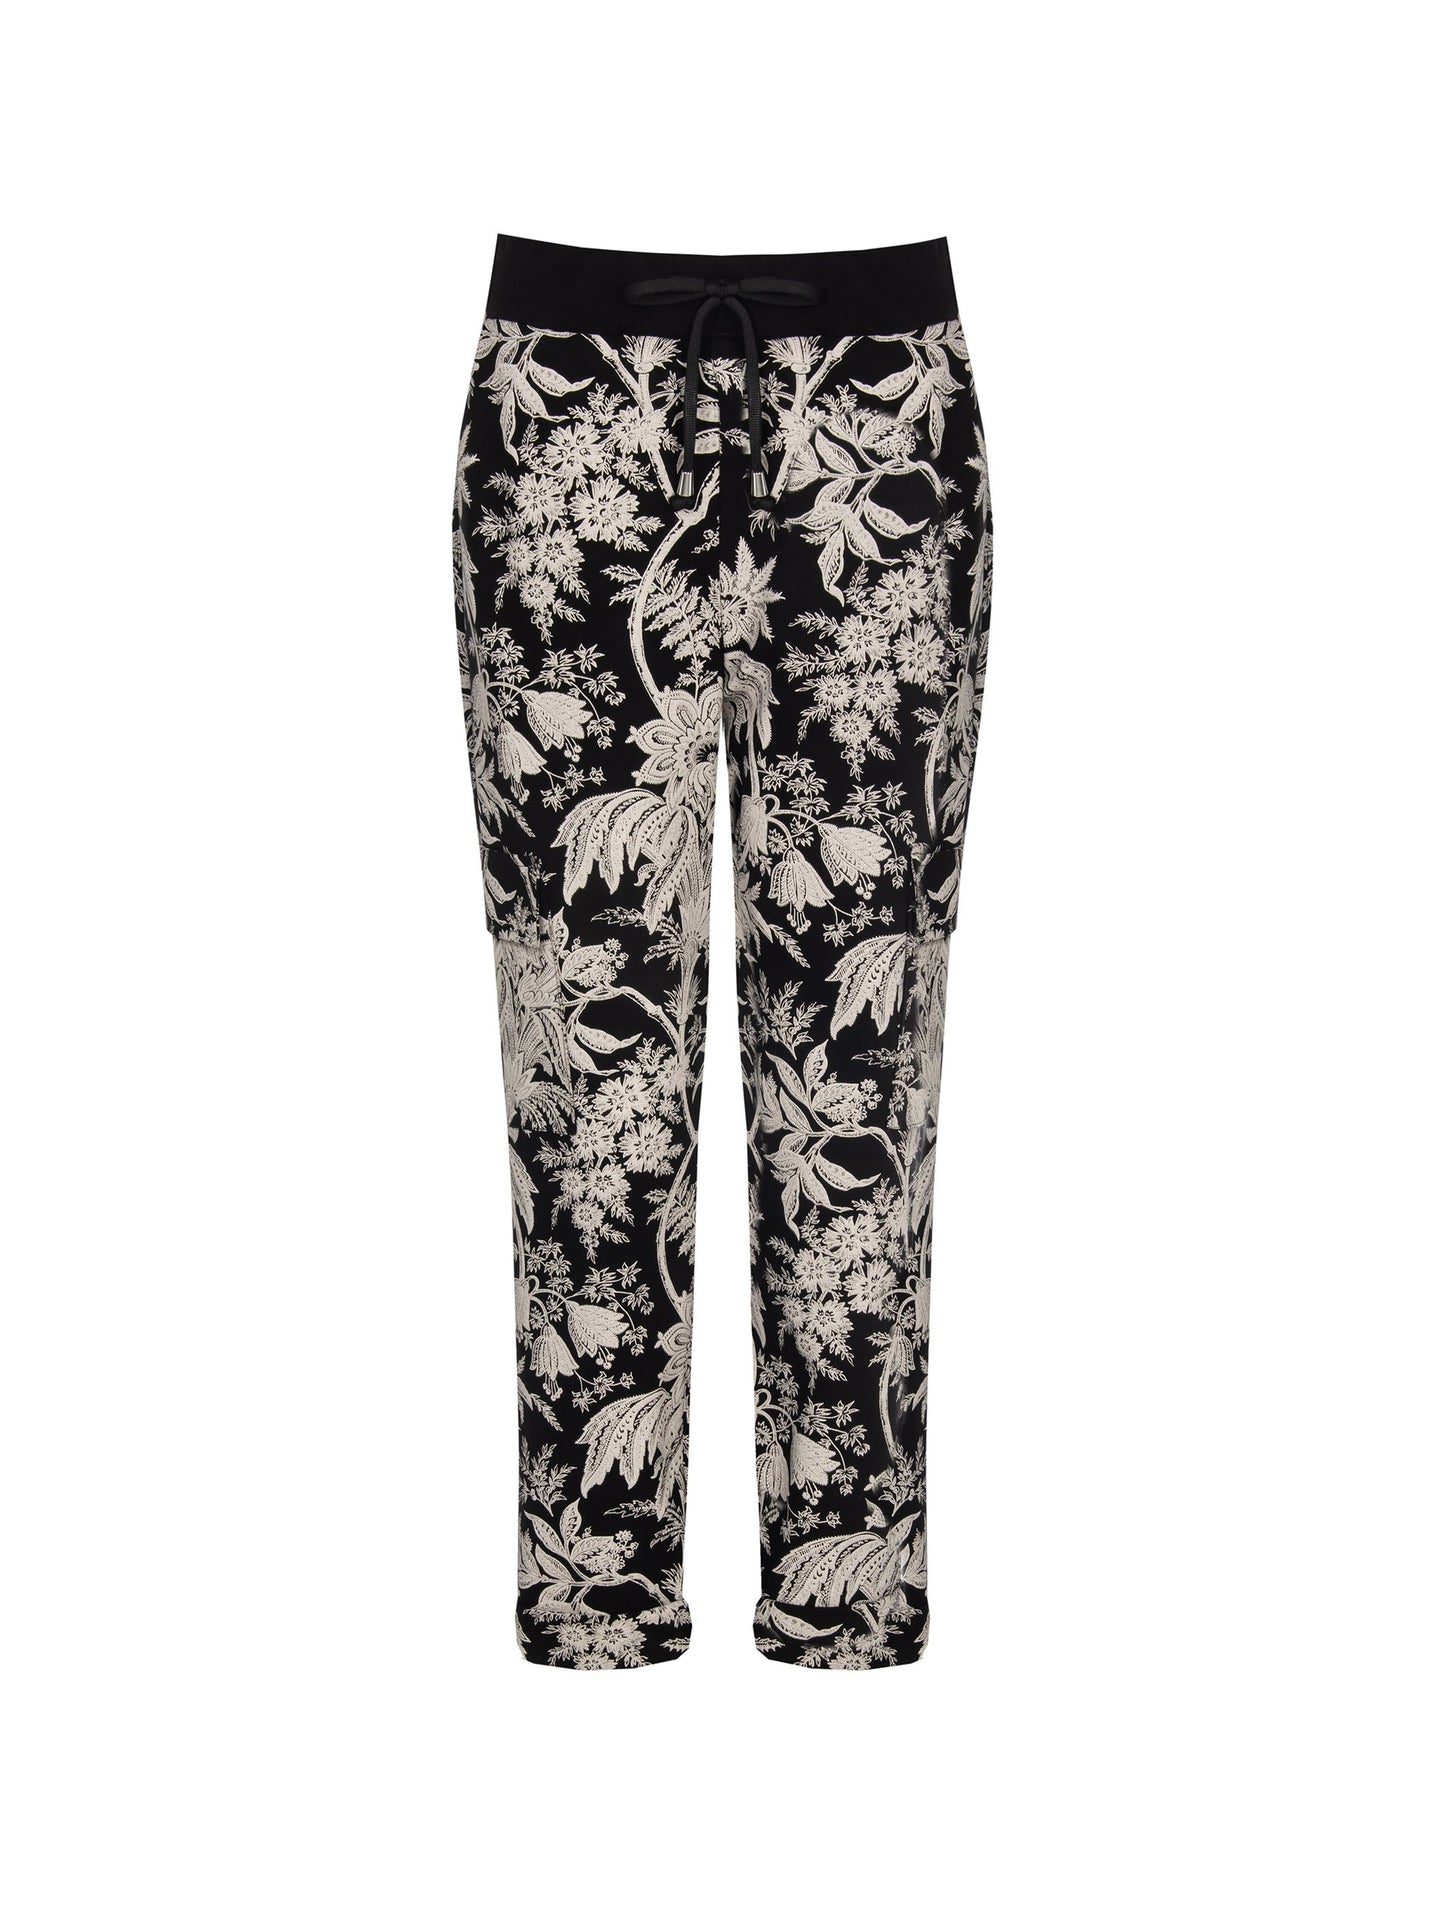 Floral joggers